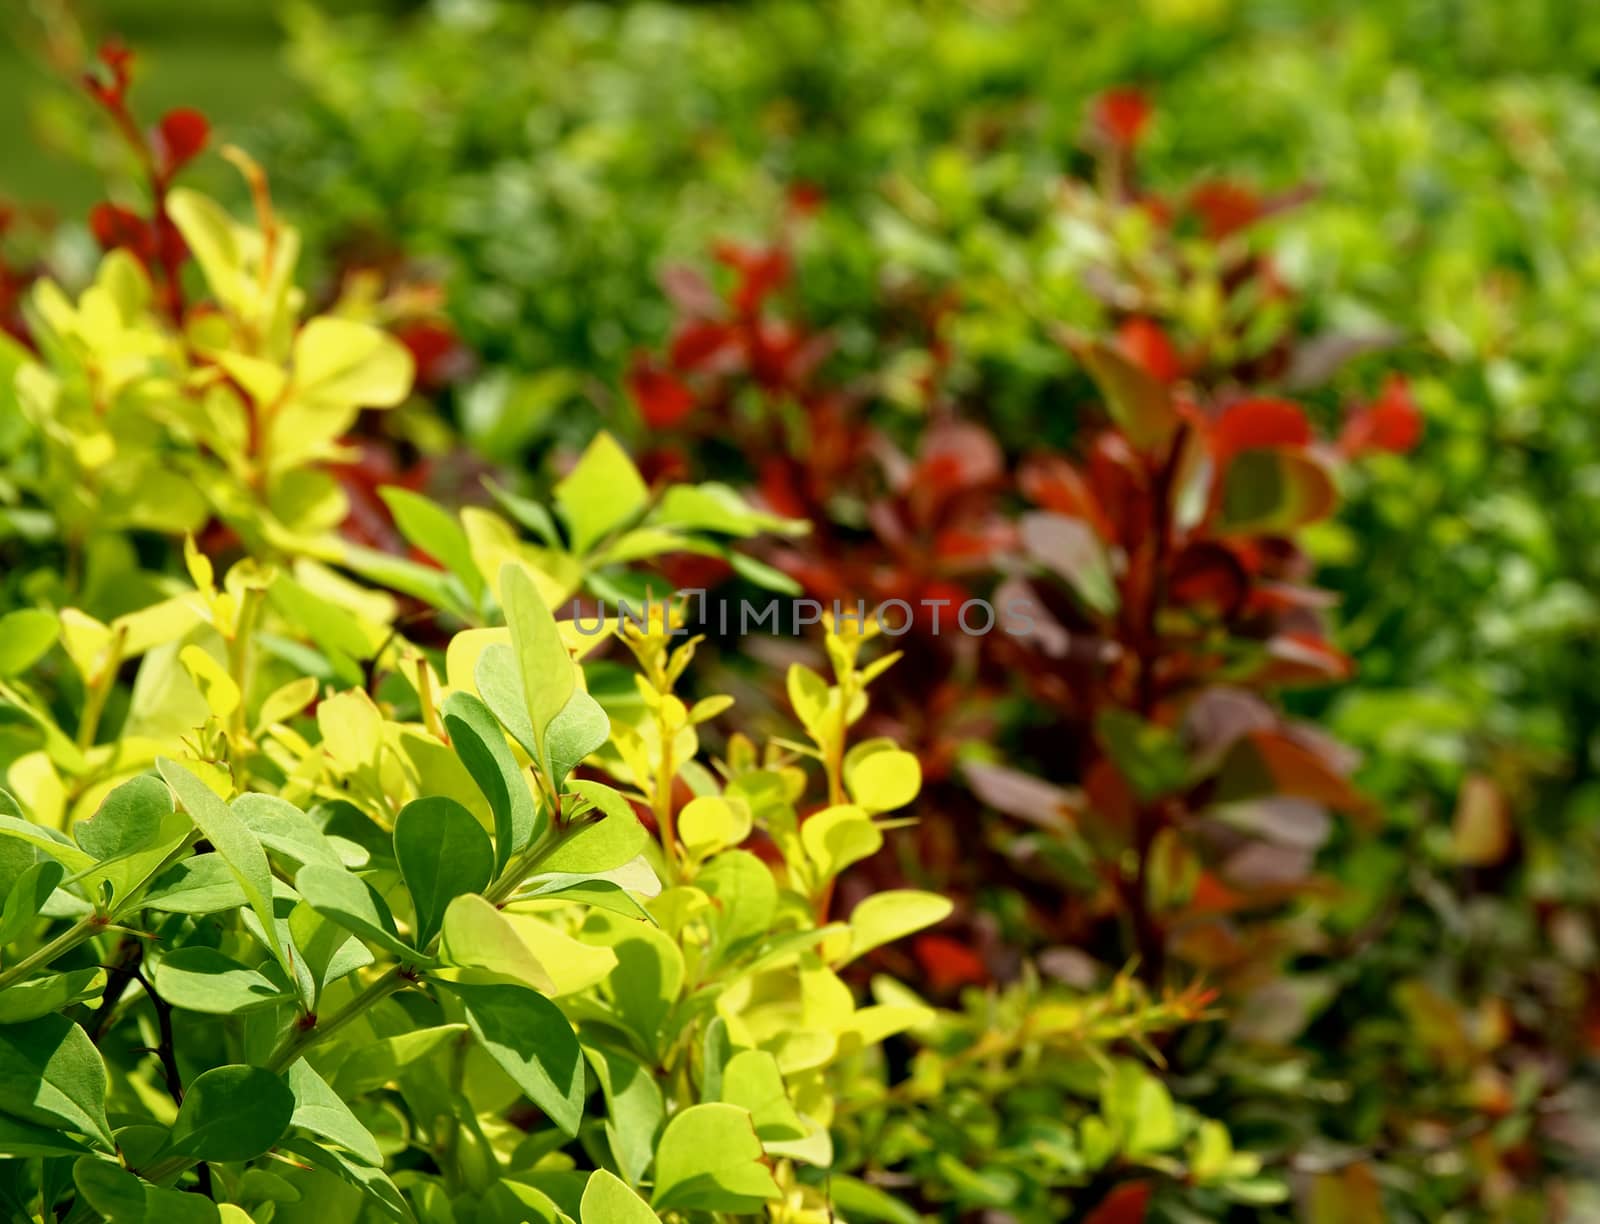 Variegated Bushes with Small Leaves closeup Outdoors. Focus on Foreground